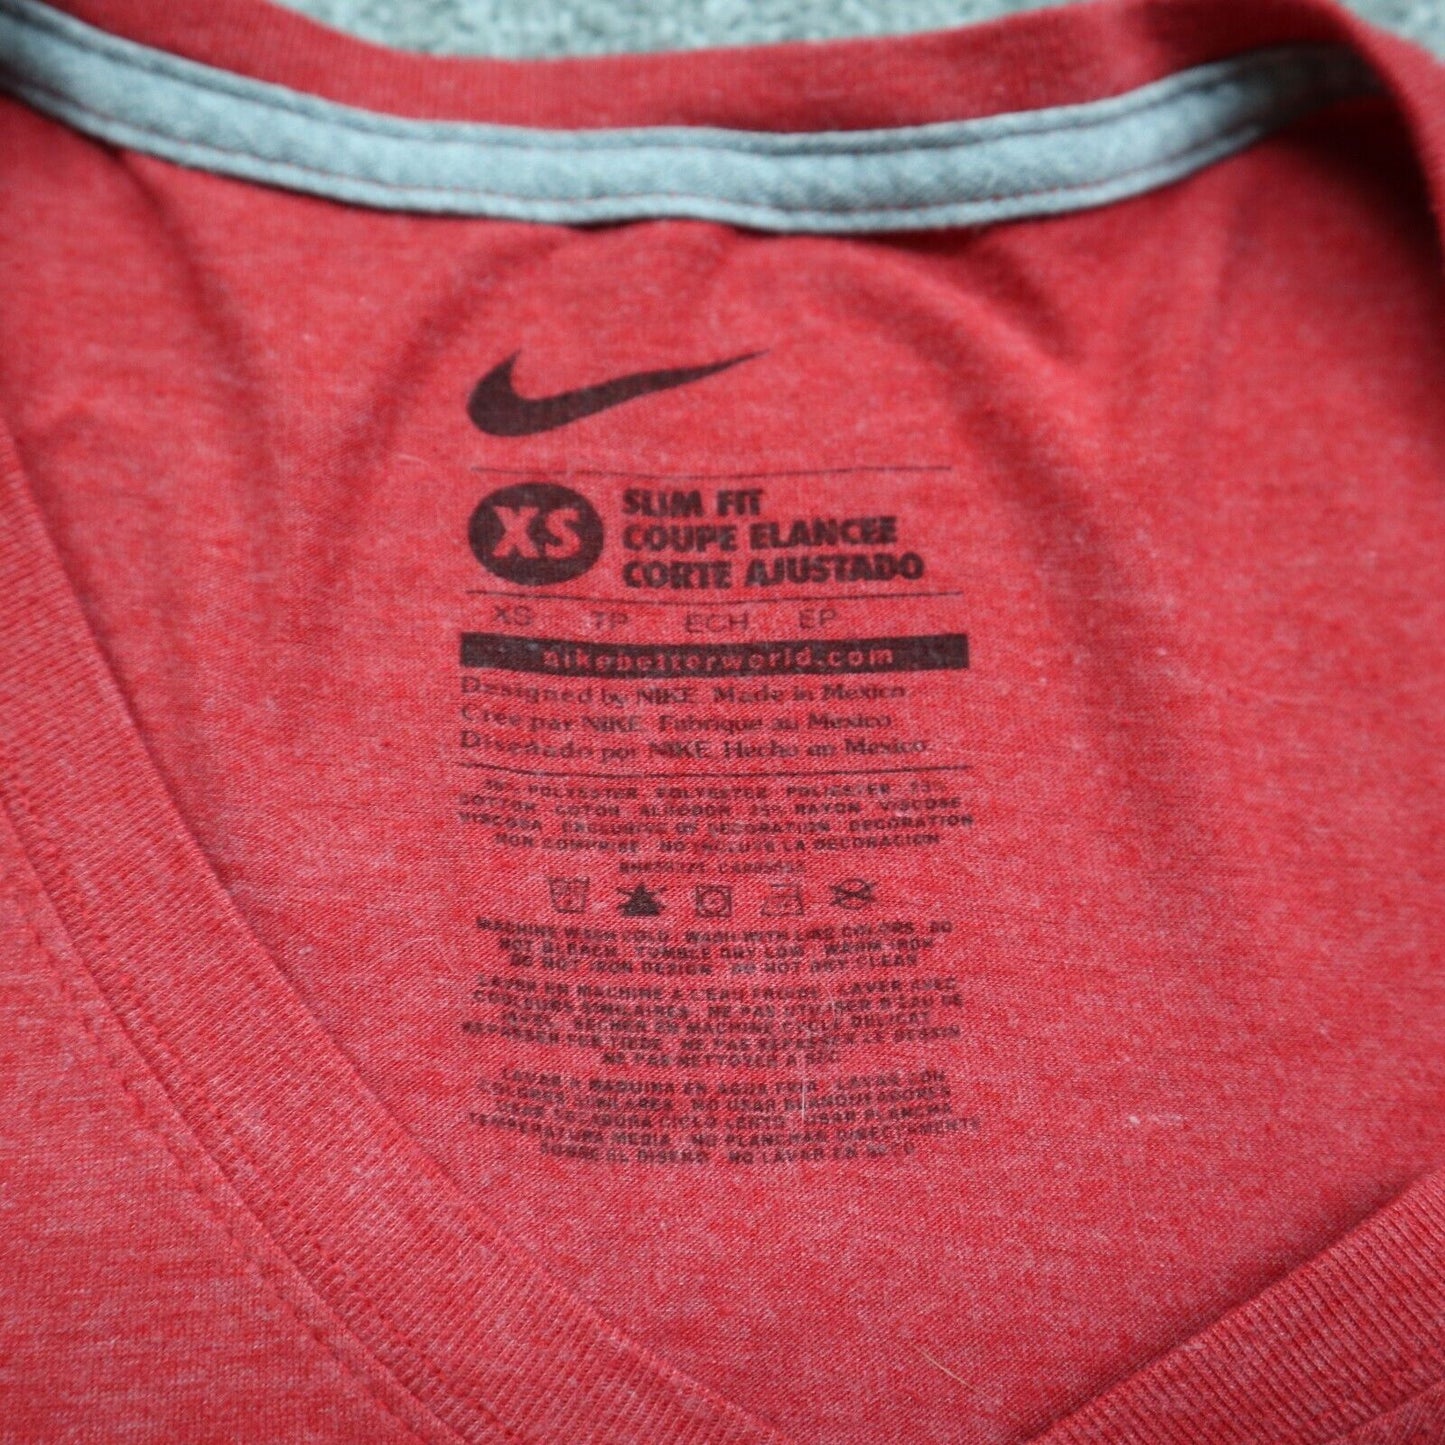 Nike Womens Pollover T-Shirt Slim Fit Long Sleeves Graphic Tee Red Size XS